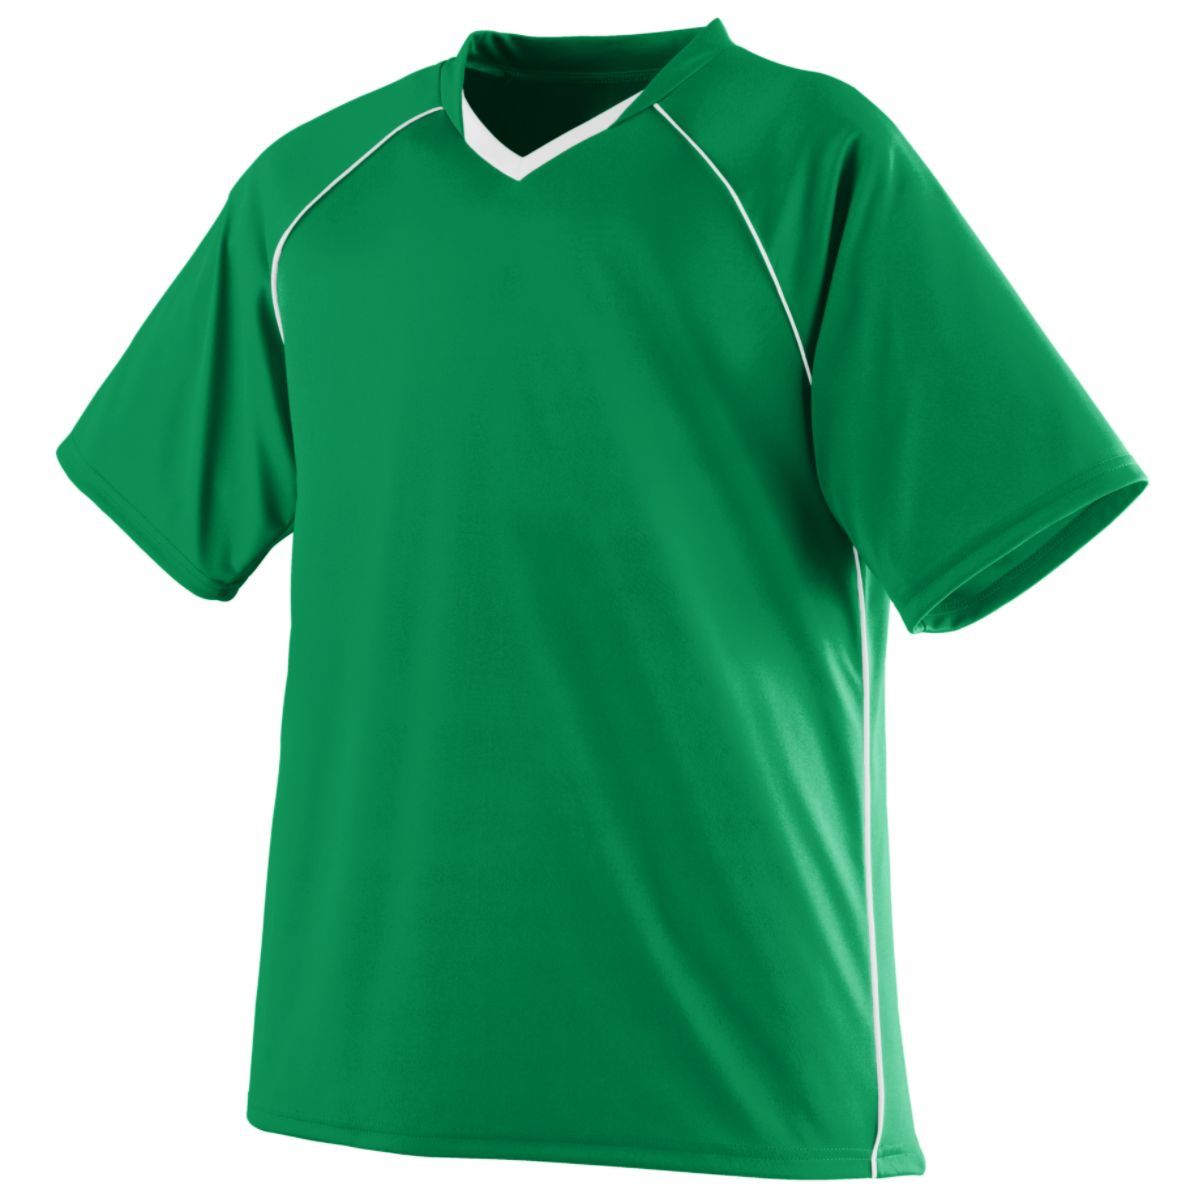 Augusta Sportswear Striker Jersey in Kelly/White  -Part of the Adult, Adult-Jersey, Augusta-Products, Soccer, Shirts, All-Sports-1 product lines at KanaleyCreations.com